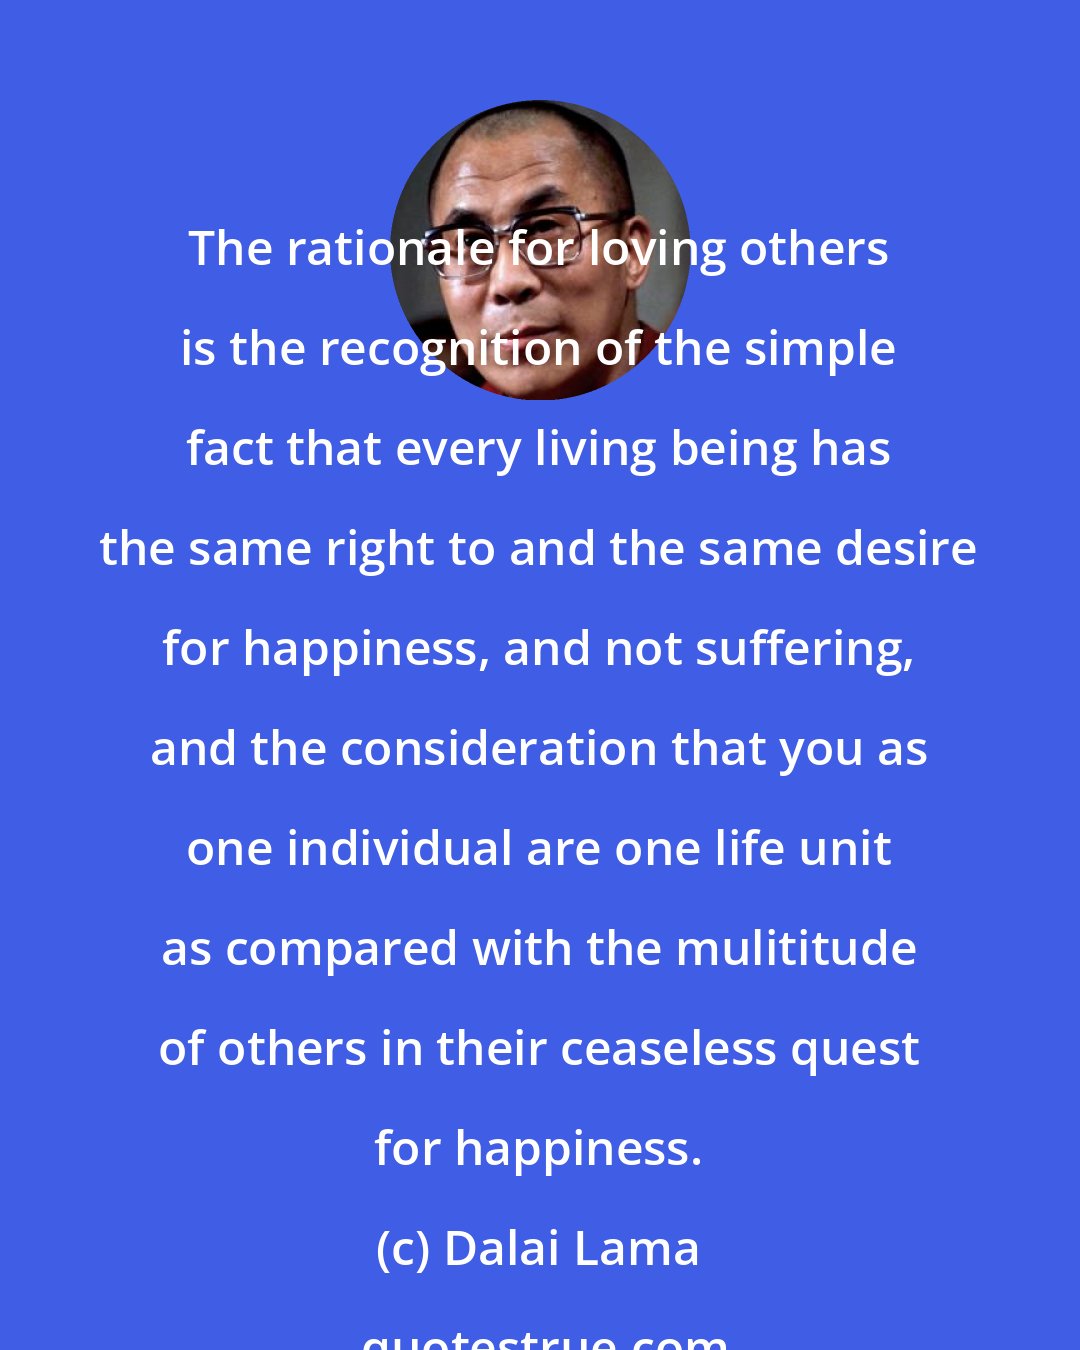 Dalai Lama: The rationale for loving others is the recognition of the simple fact that every living being has the same right to and the same desire for happiness, and not suffering, and the consideration that you as one individual are one life unit as compared with the mulititude of others in their ceaseless quest for happiness.